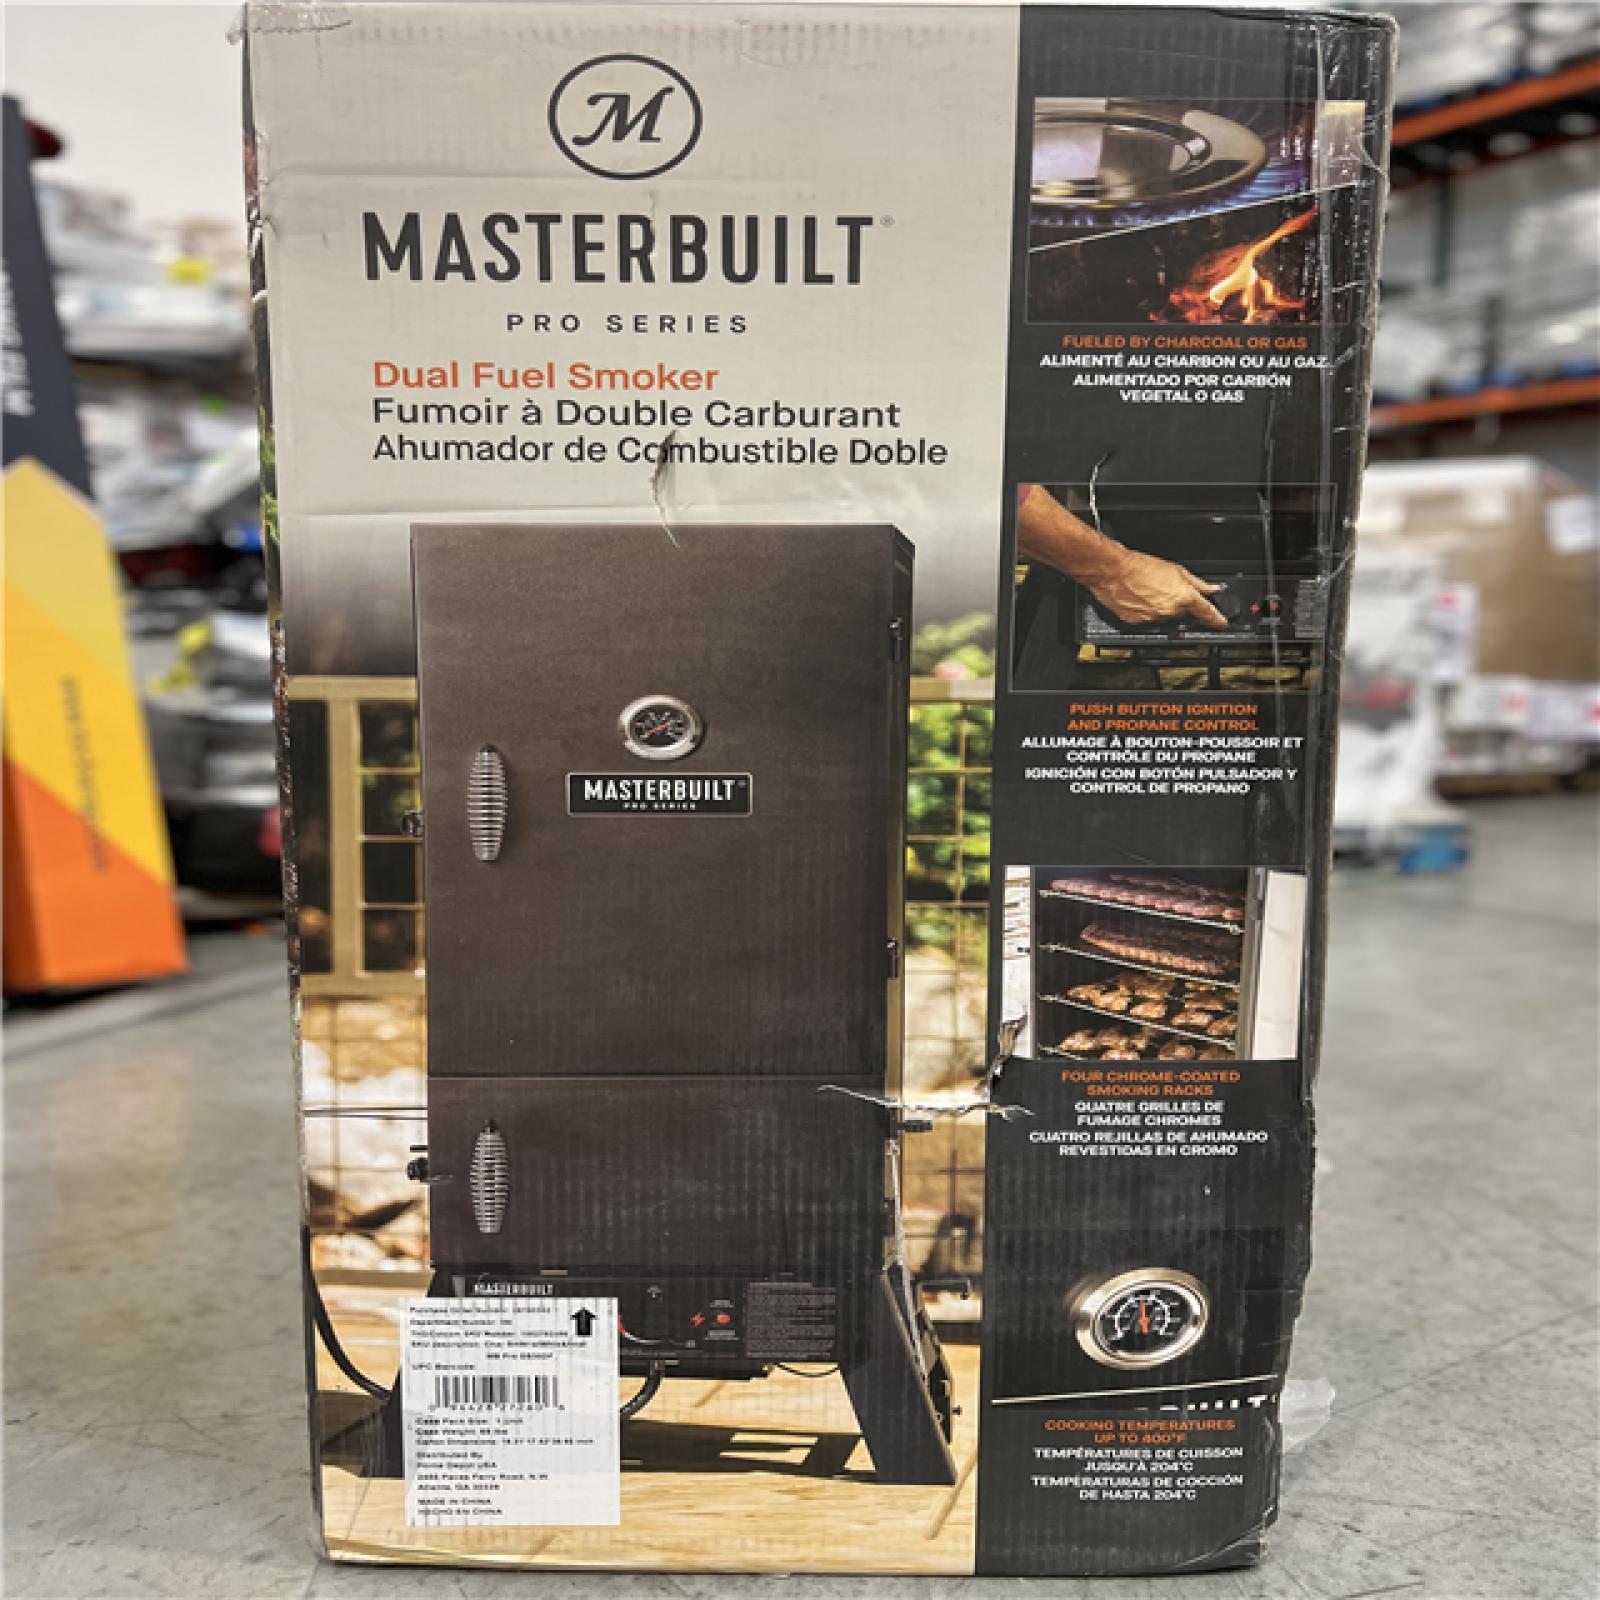 NEW! - Masterbuilt 30 in. Dual Fuel Propane Gas and Charcoal Smoker in Black